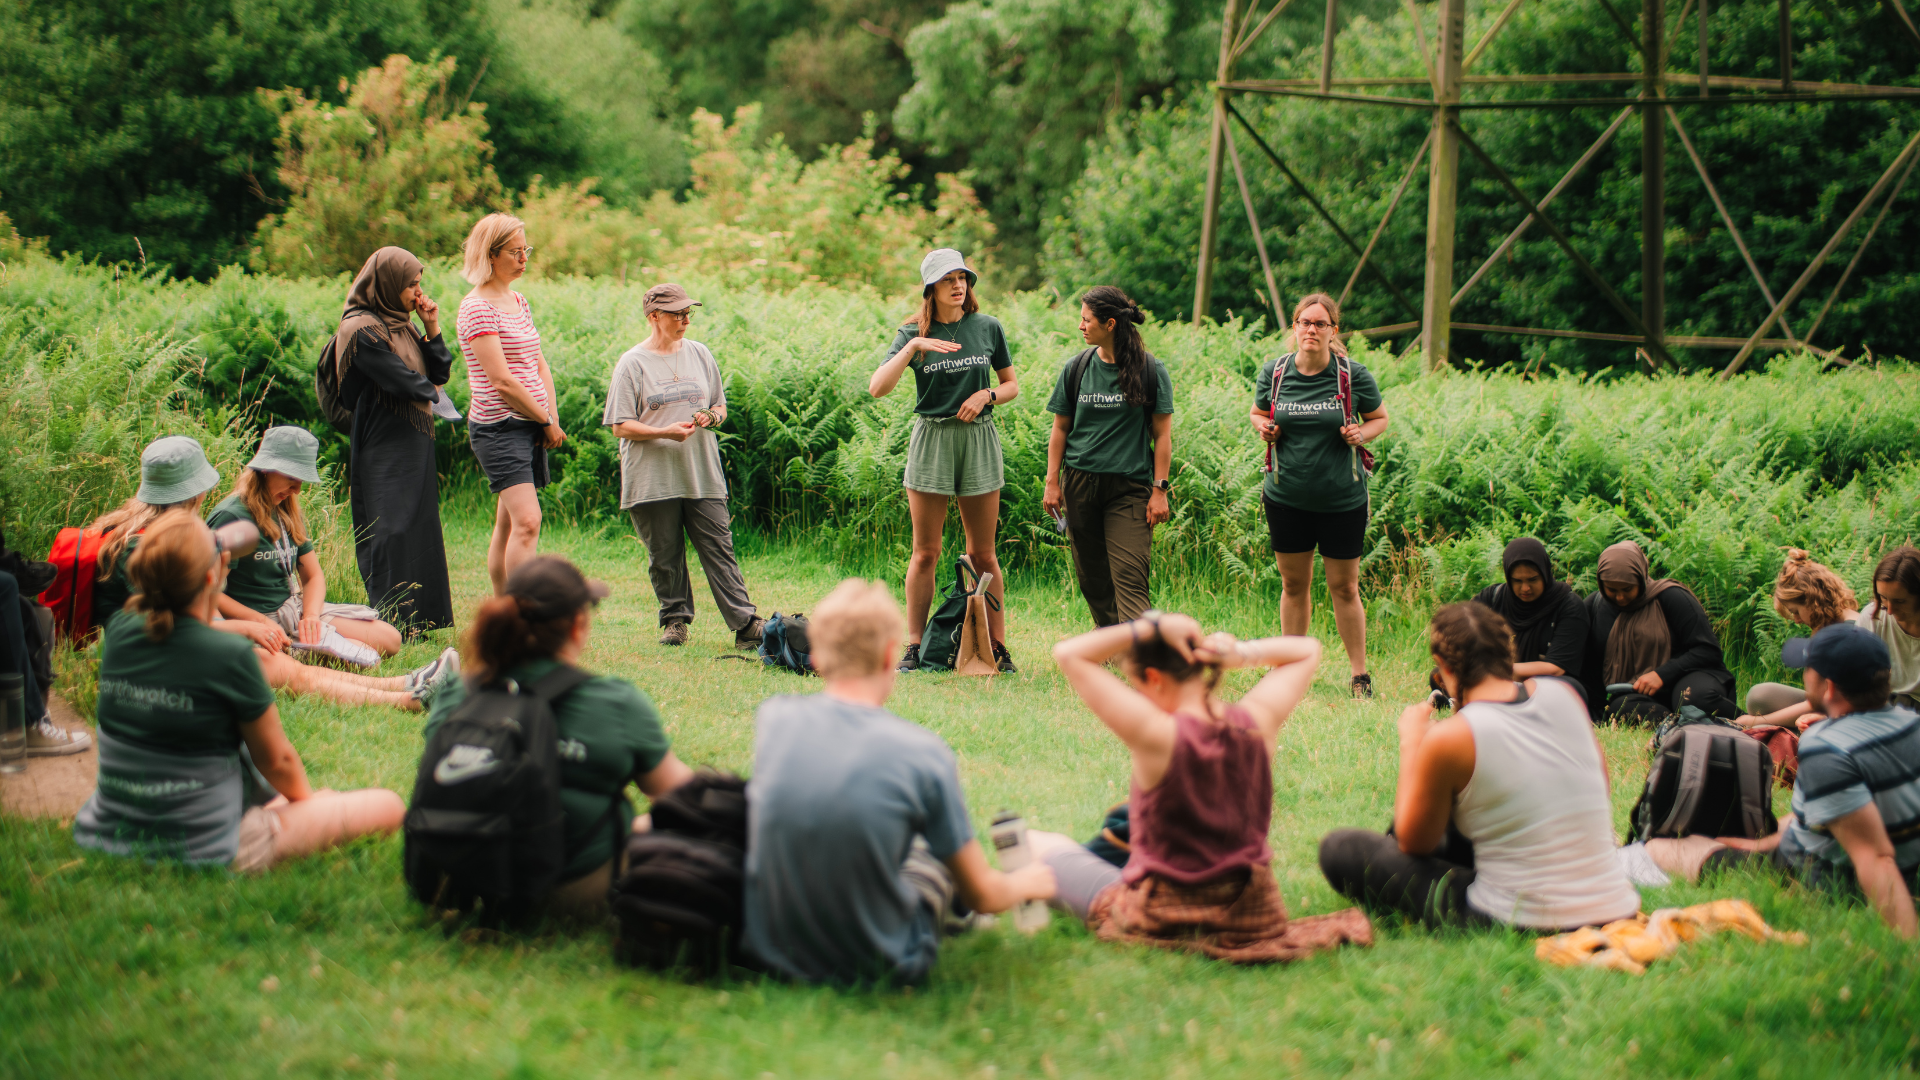 A group of teachers sitting in a circle outside surrounded by nature. Earthwatch Education staff in branded t-shirts giving a presentation.